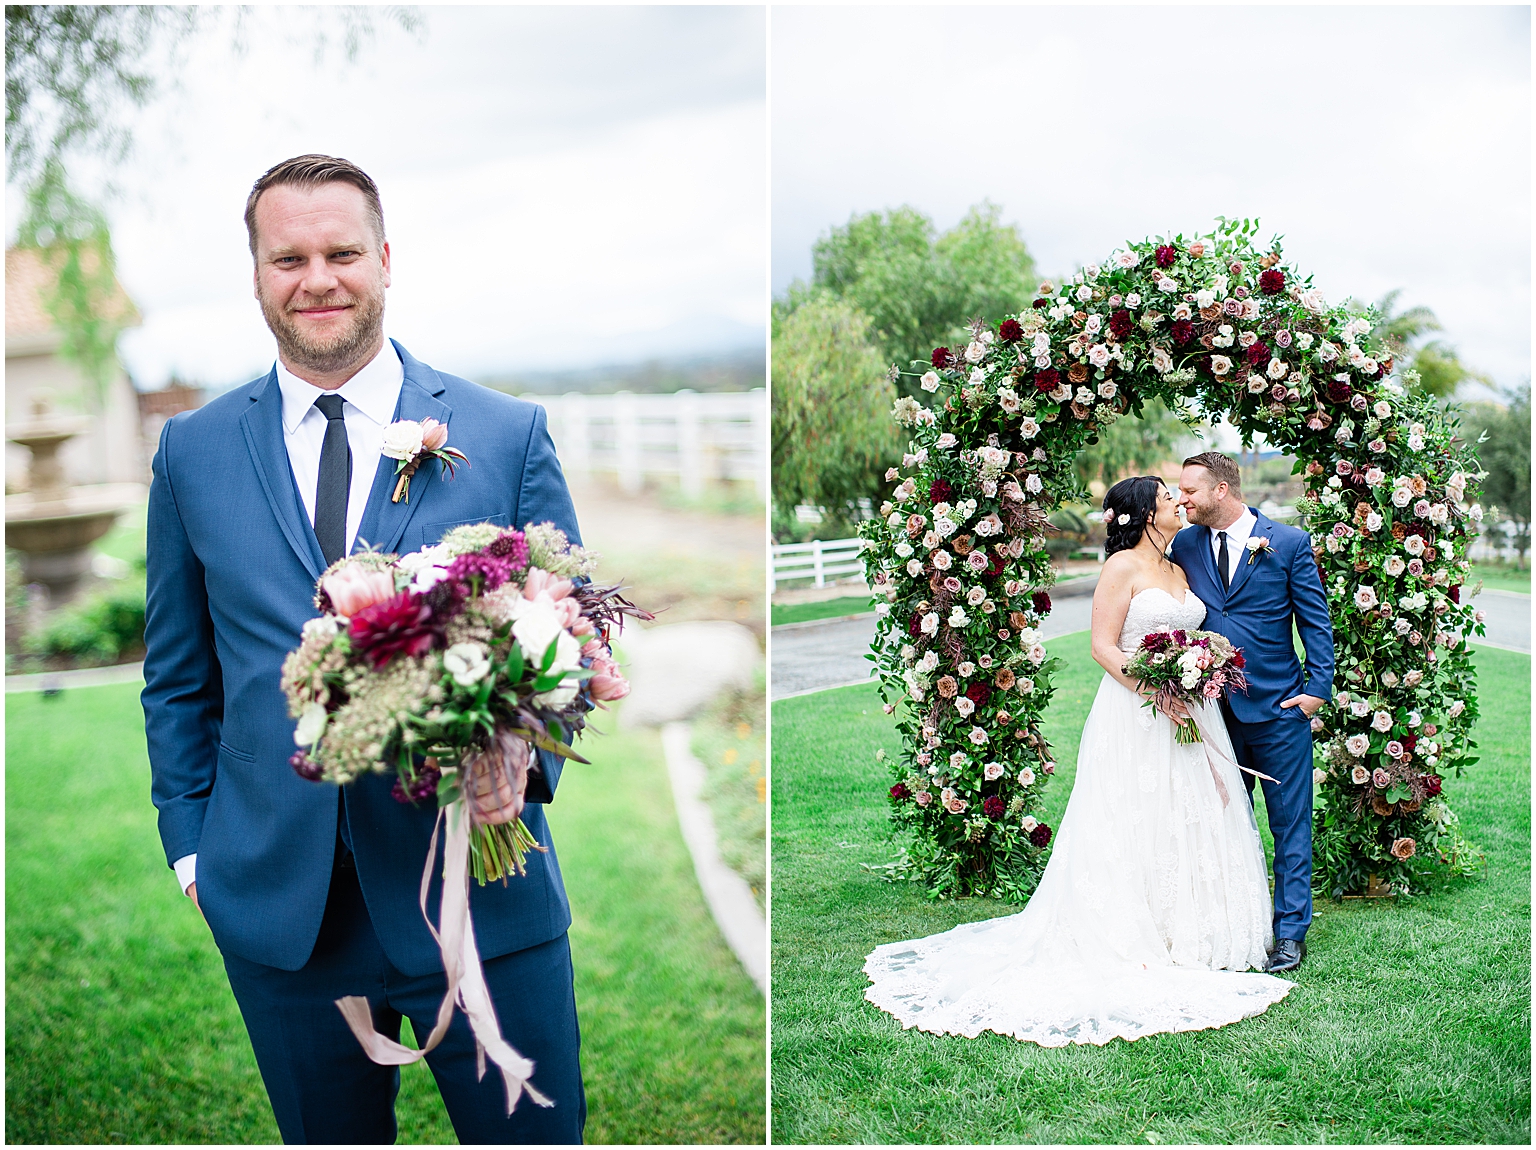 Groom holds the bouquet, and the bride and groom share a kiss in front of the flower arch